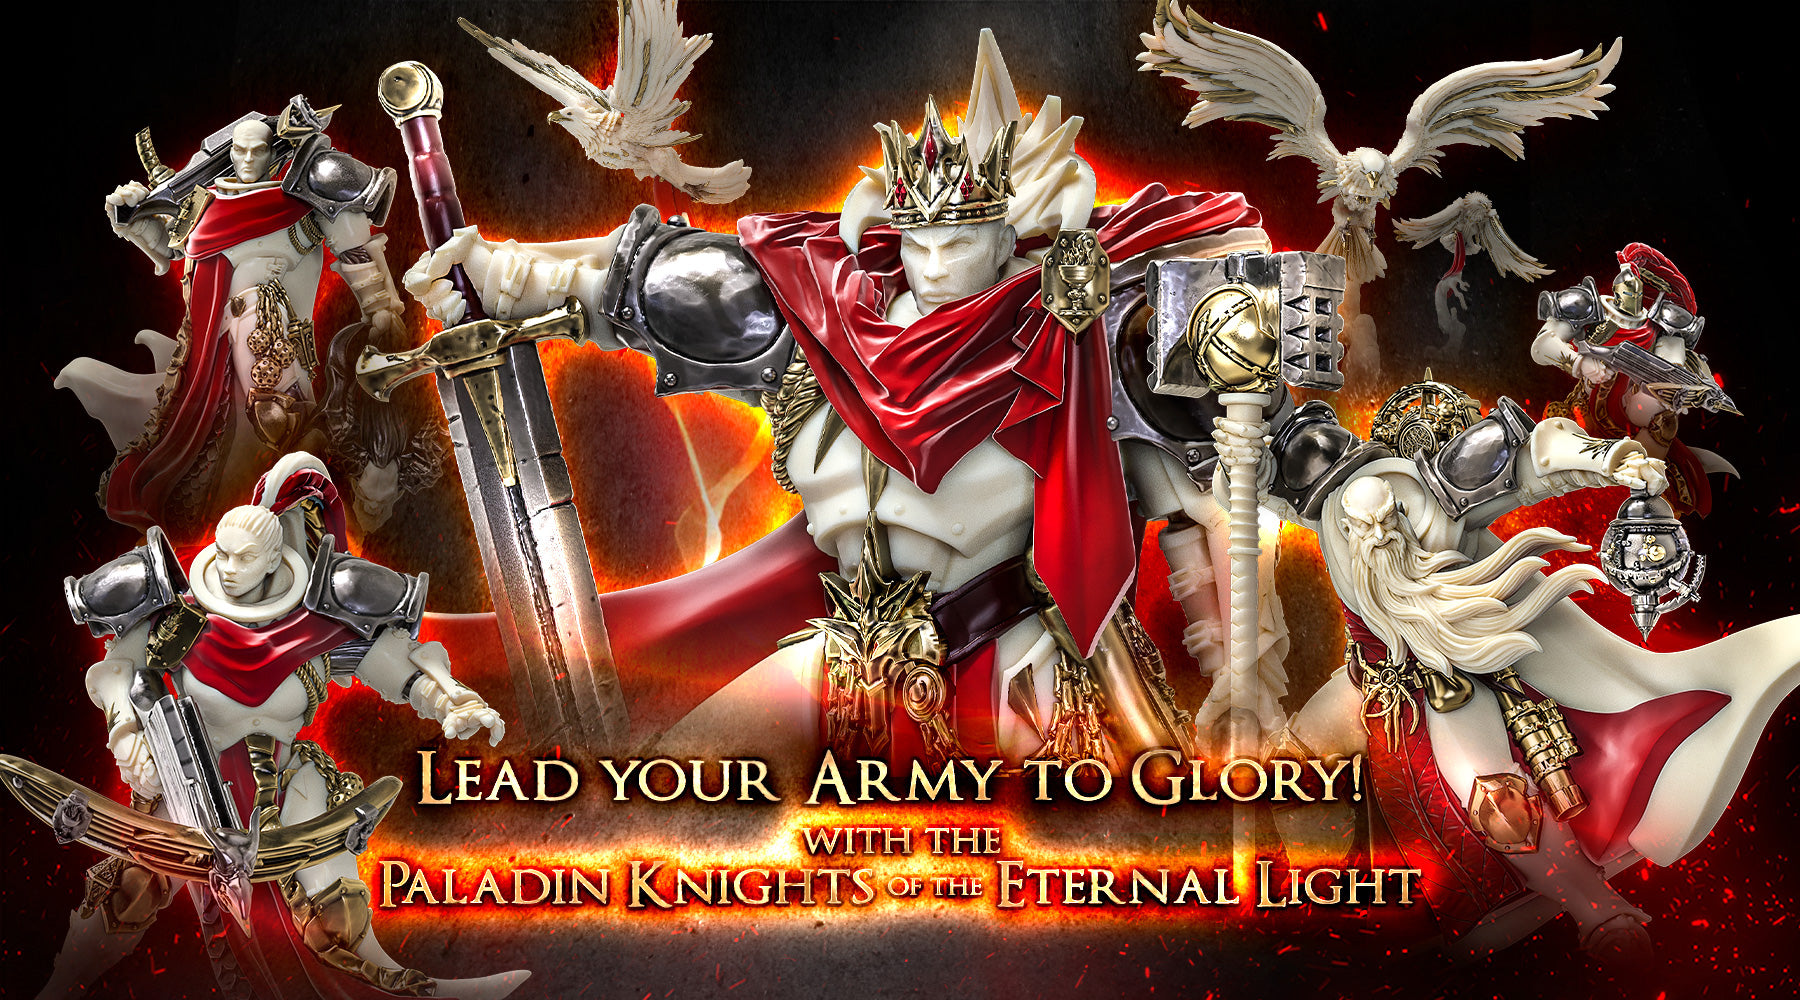 We are the Paladin Knights of the Eternal Light